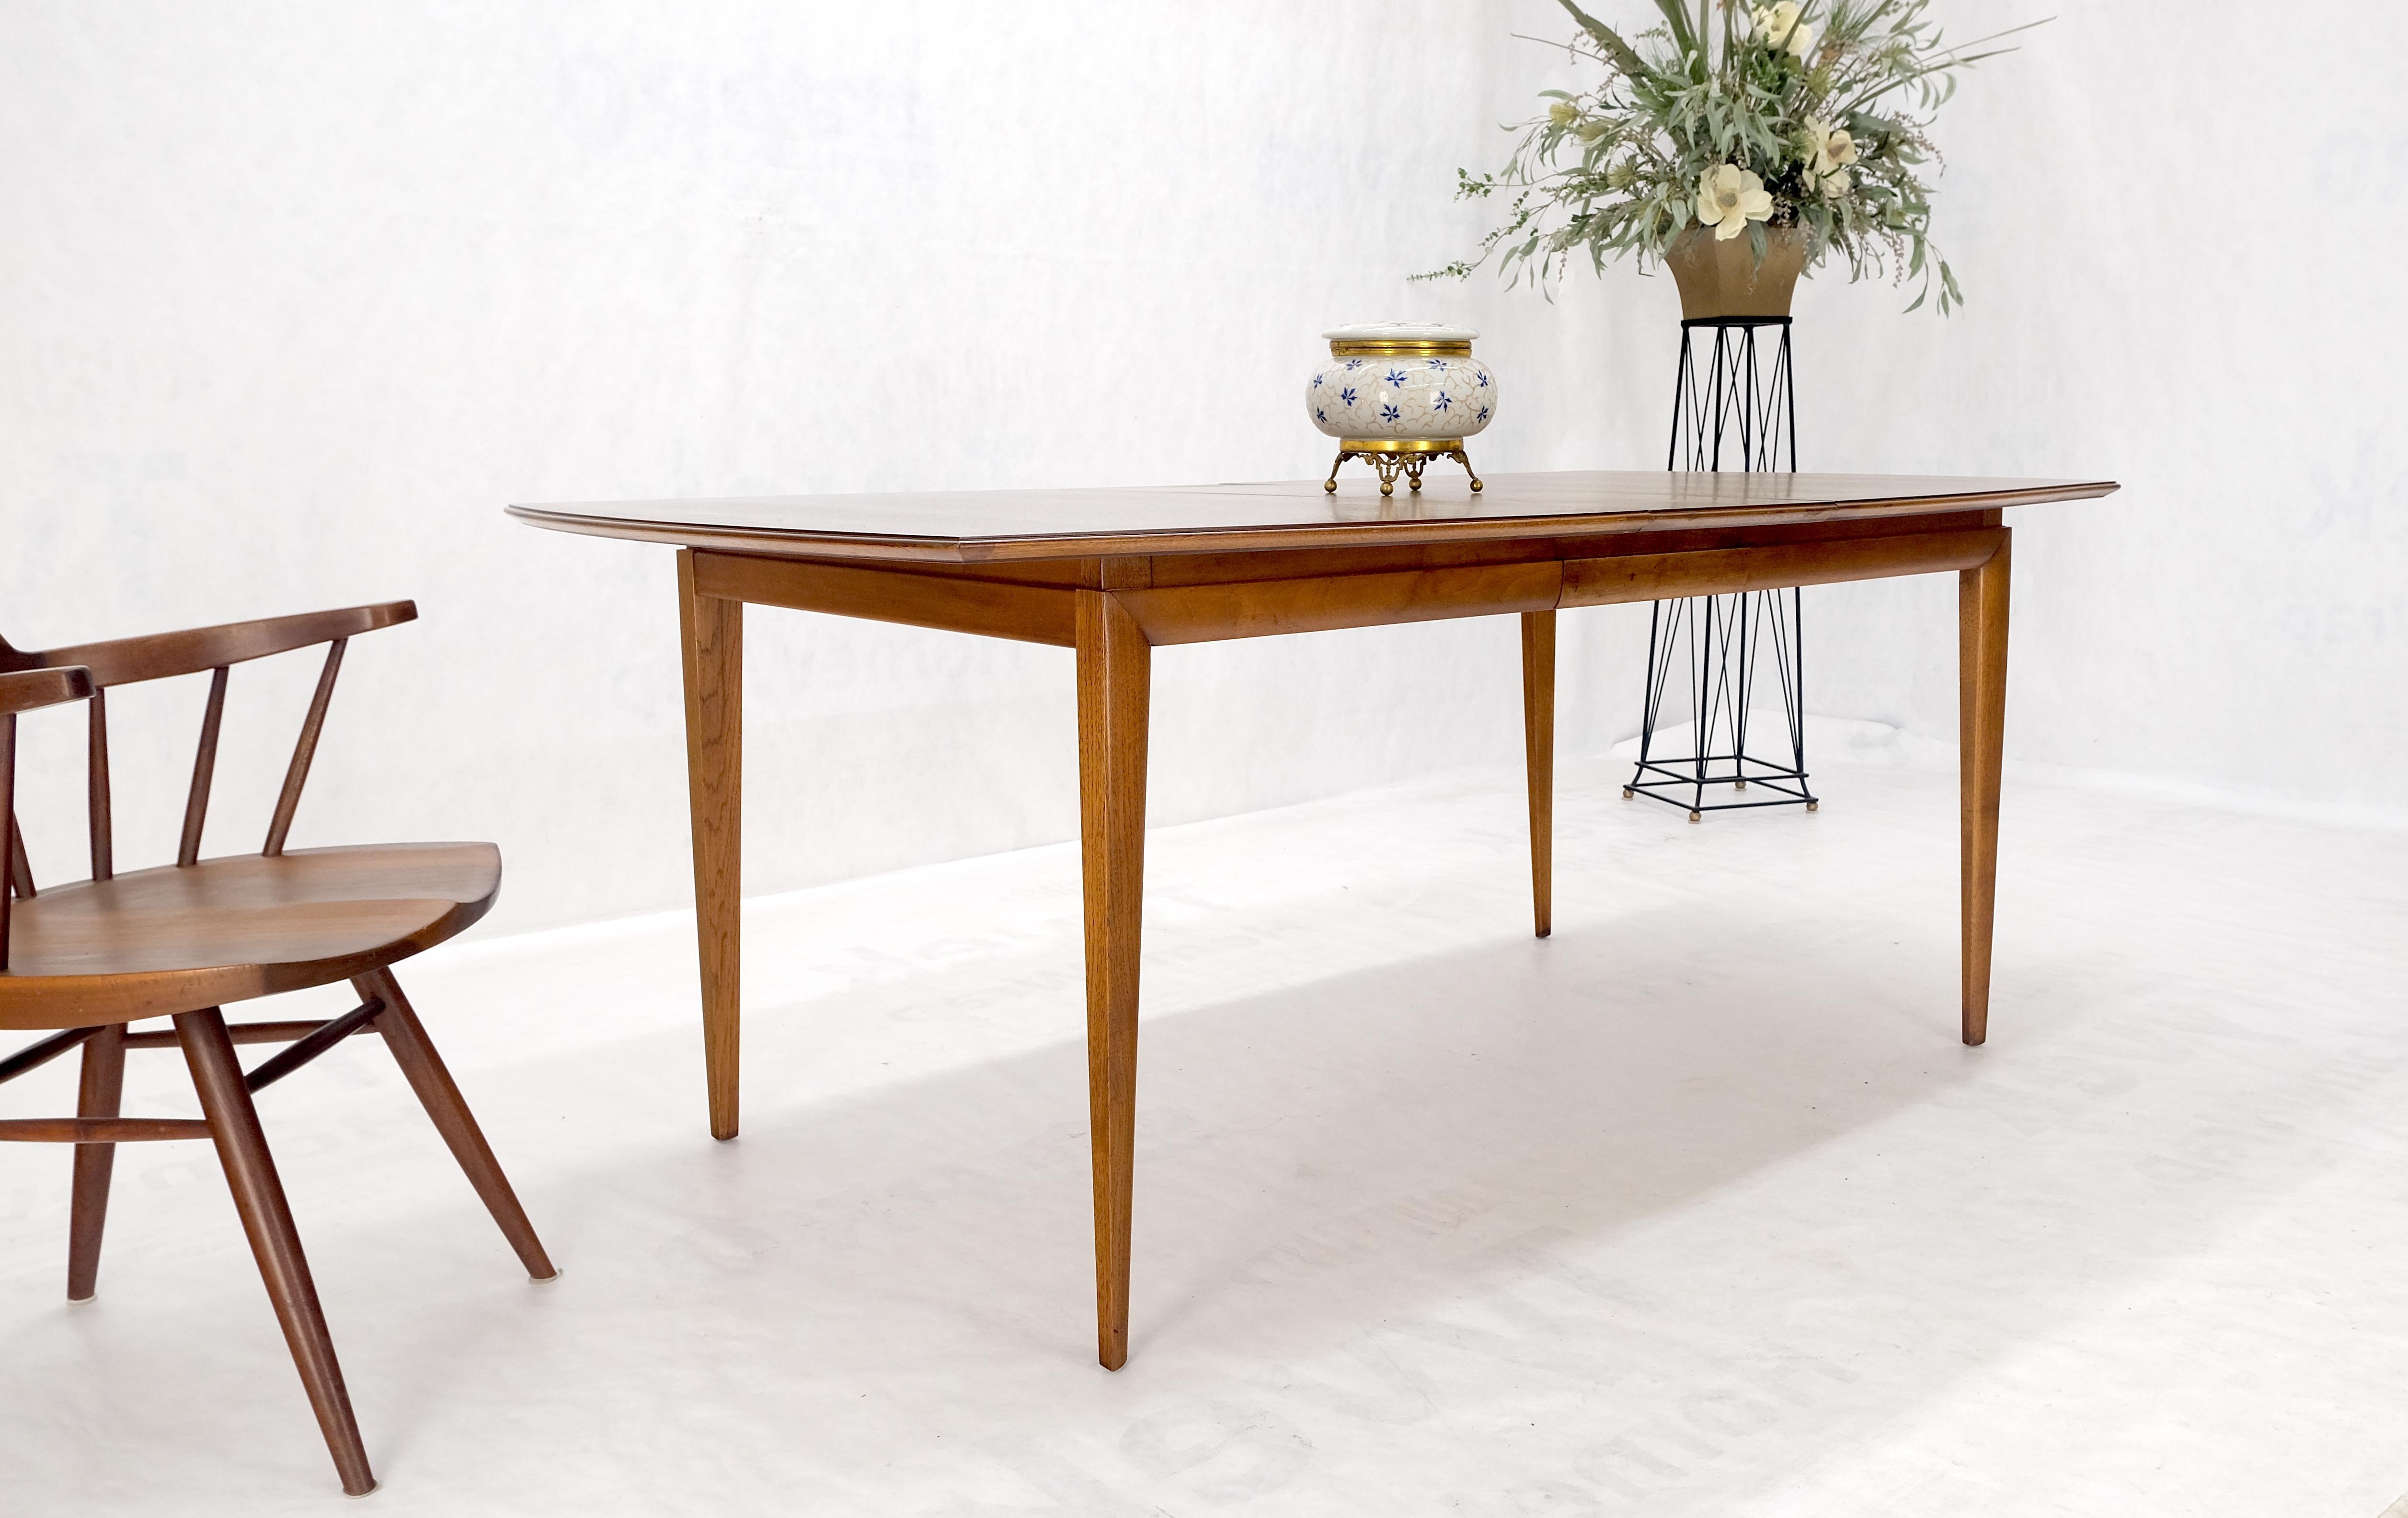 American Walnut Mid Century Modern Boat Shape Dining Table 1 Extension Leaf MINT For Sale 4